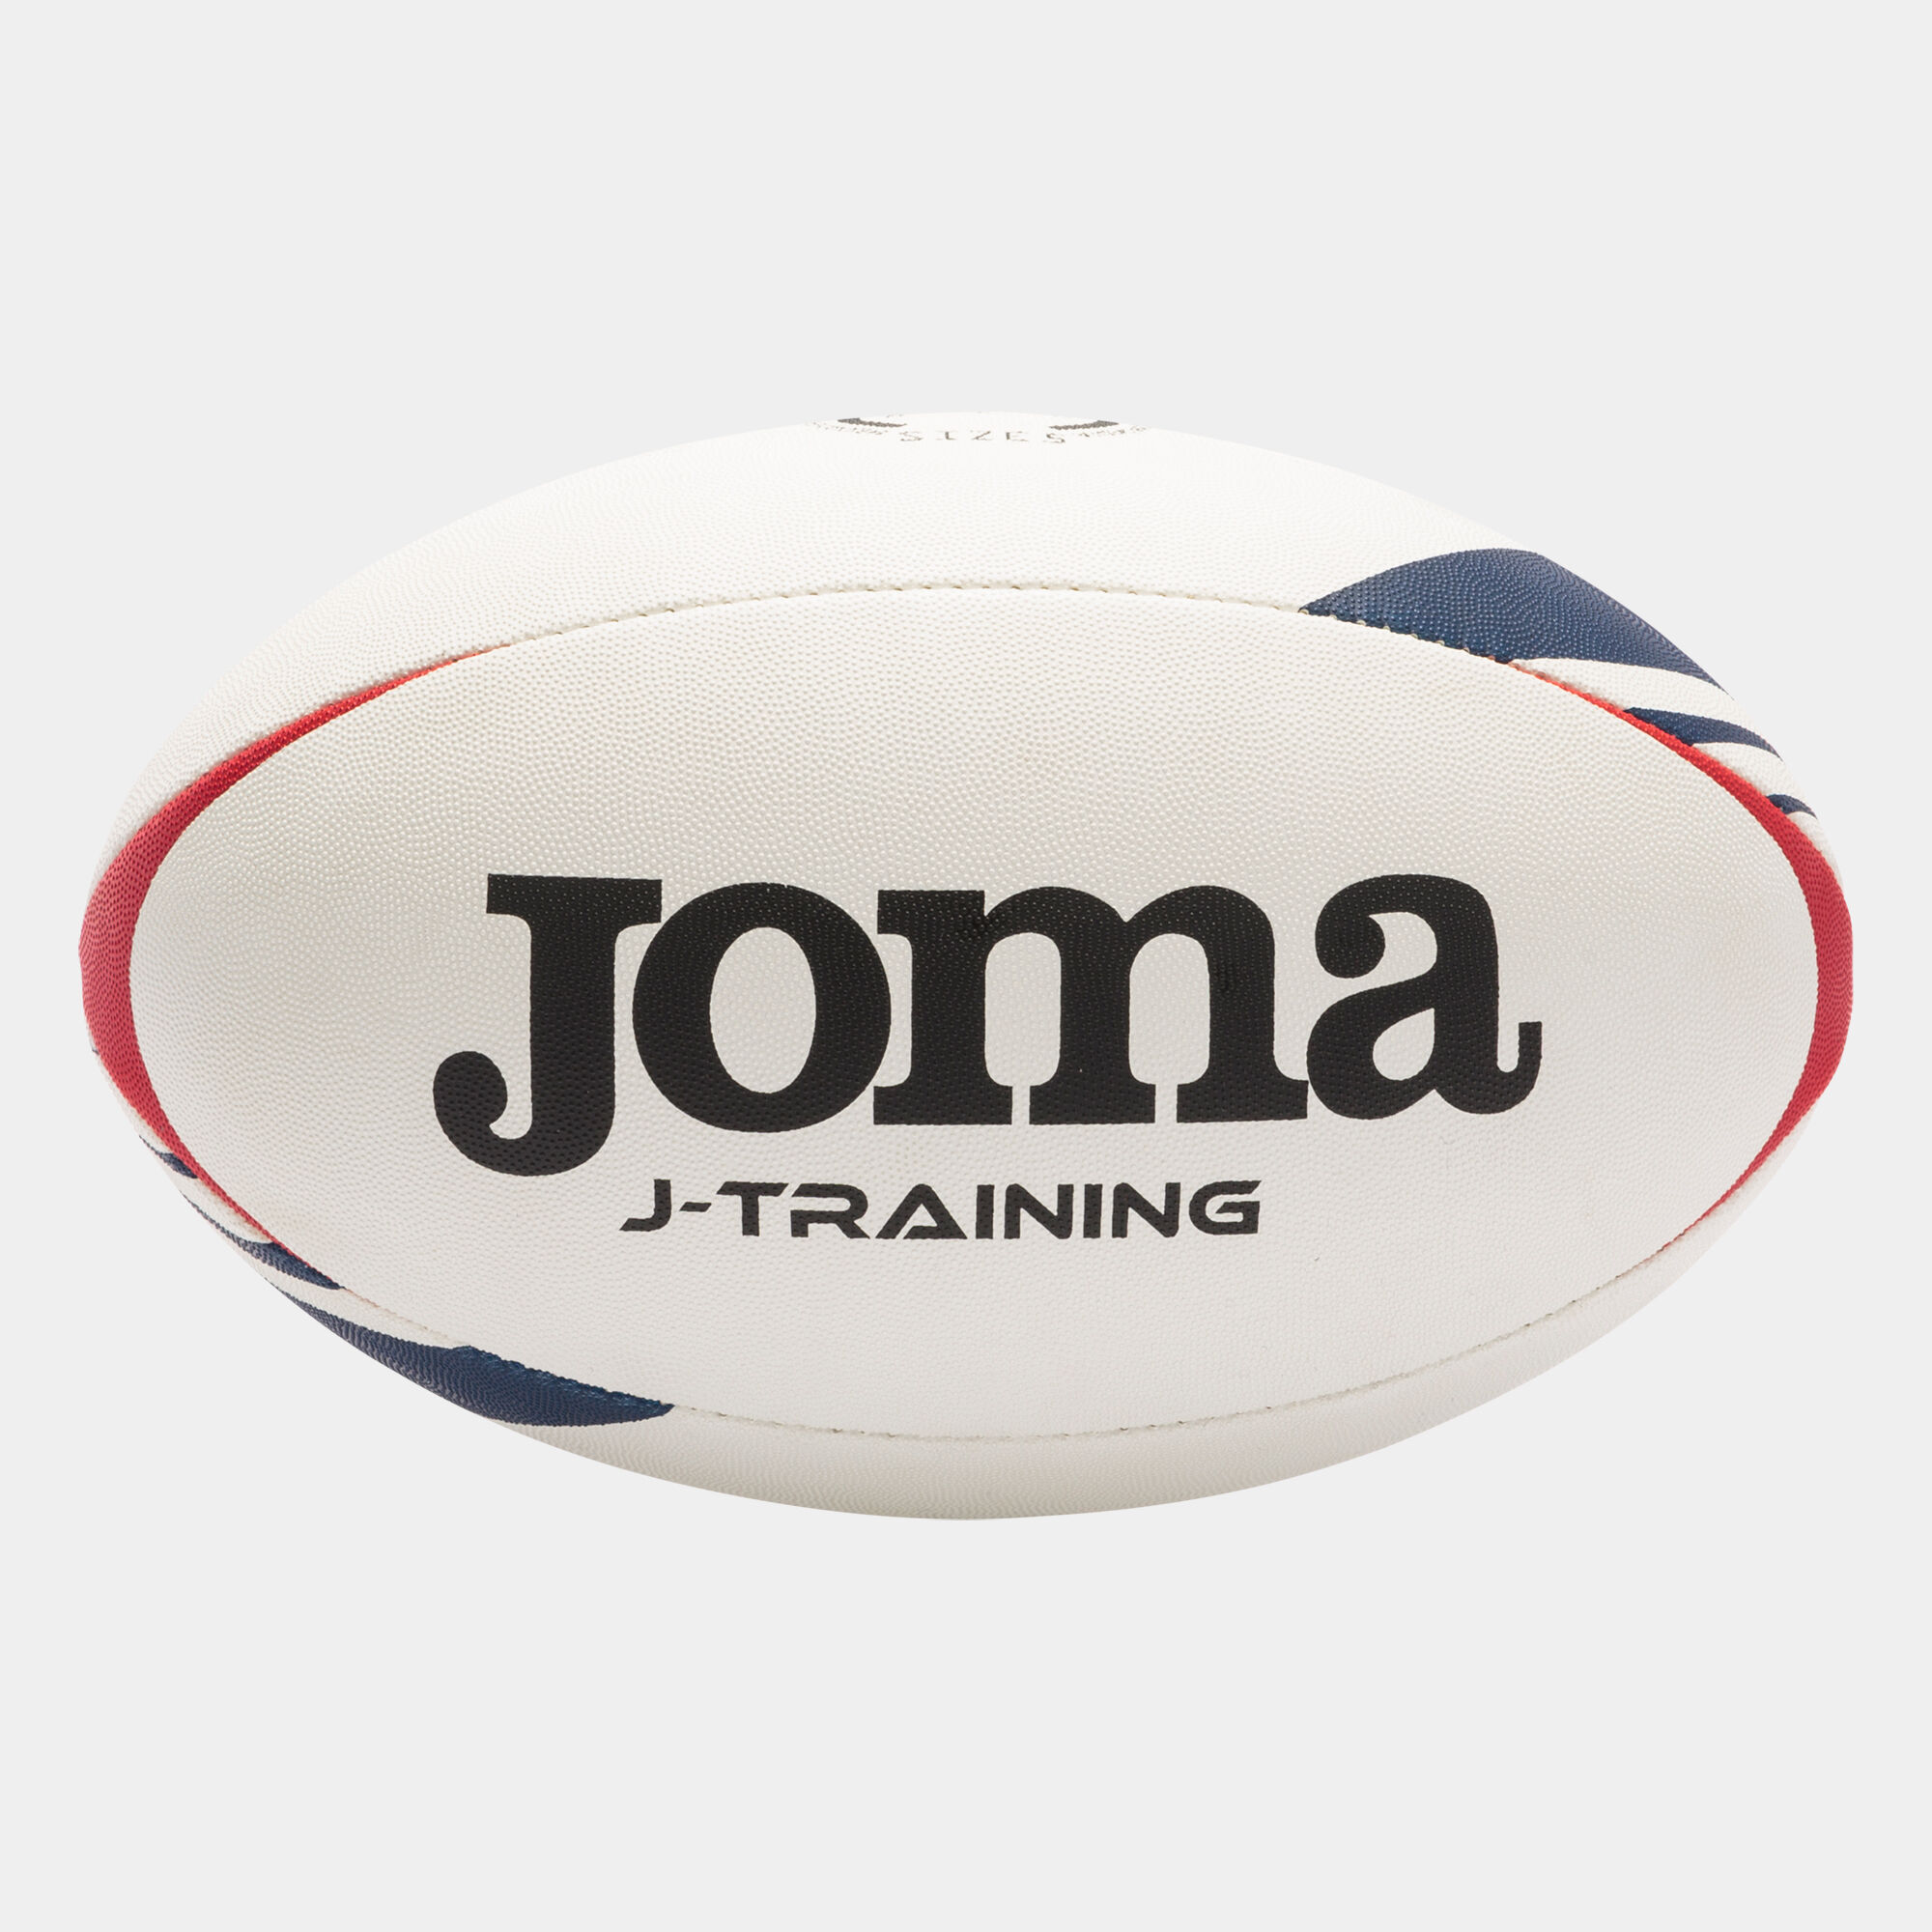 Rugby ball J-Training white red navy blue